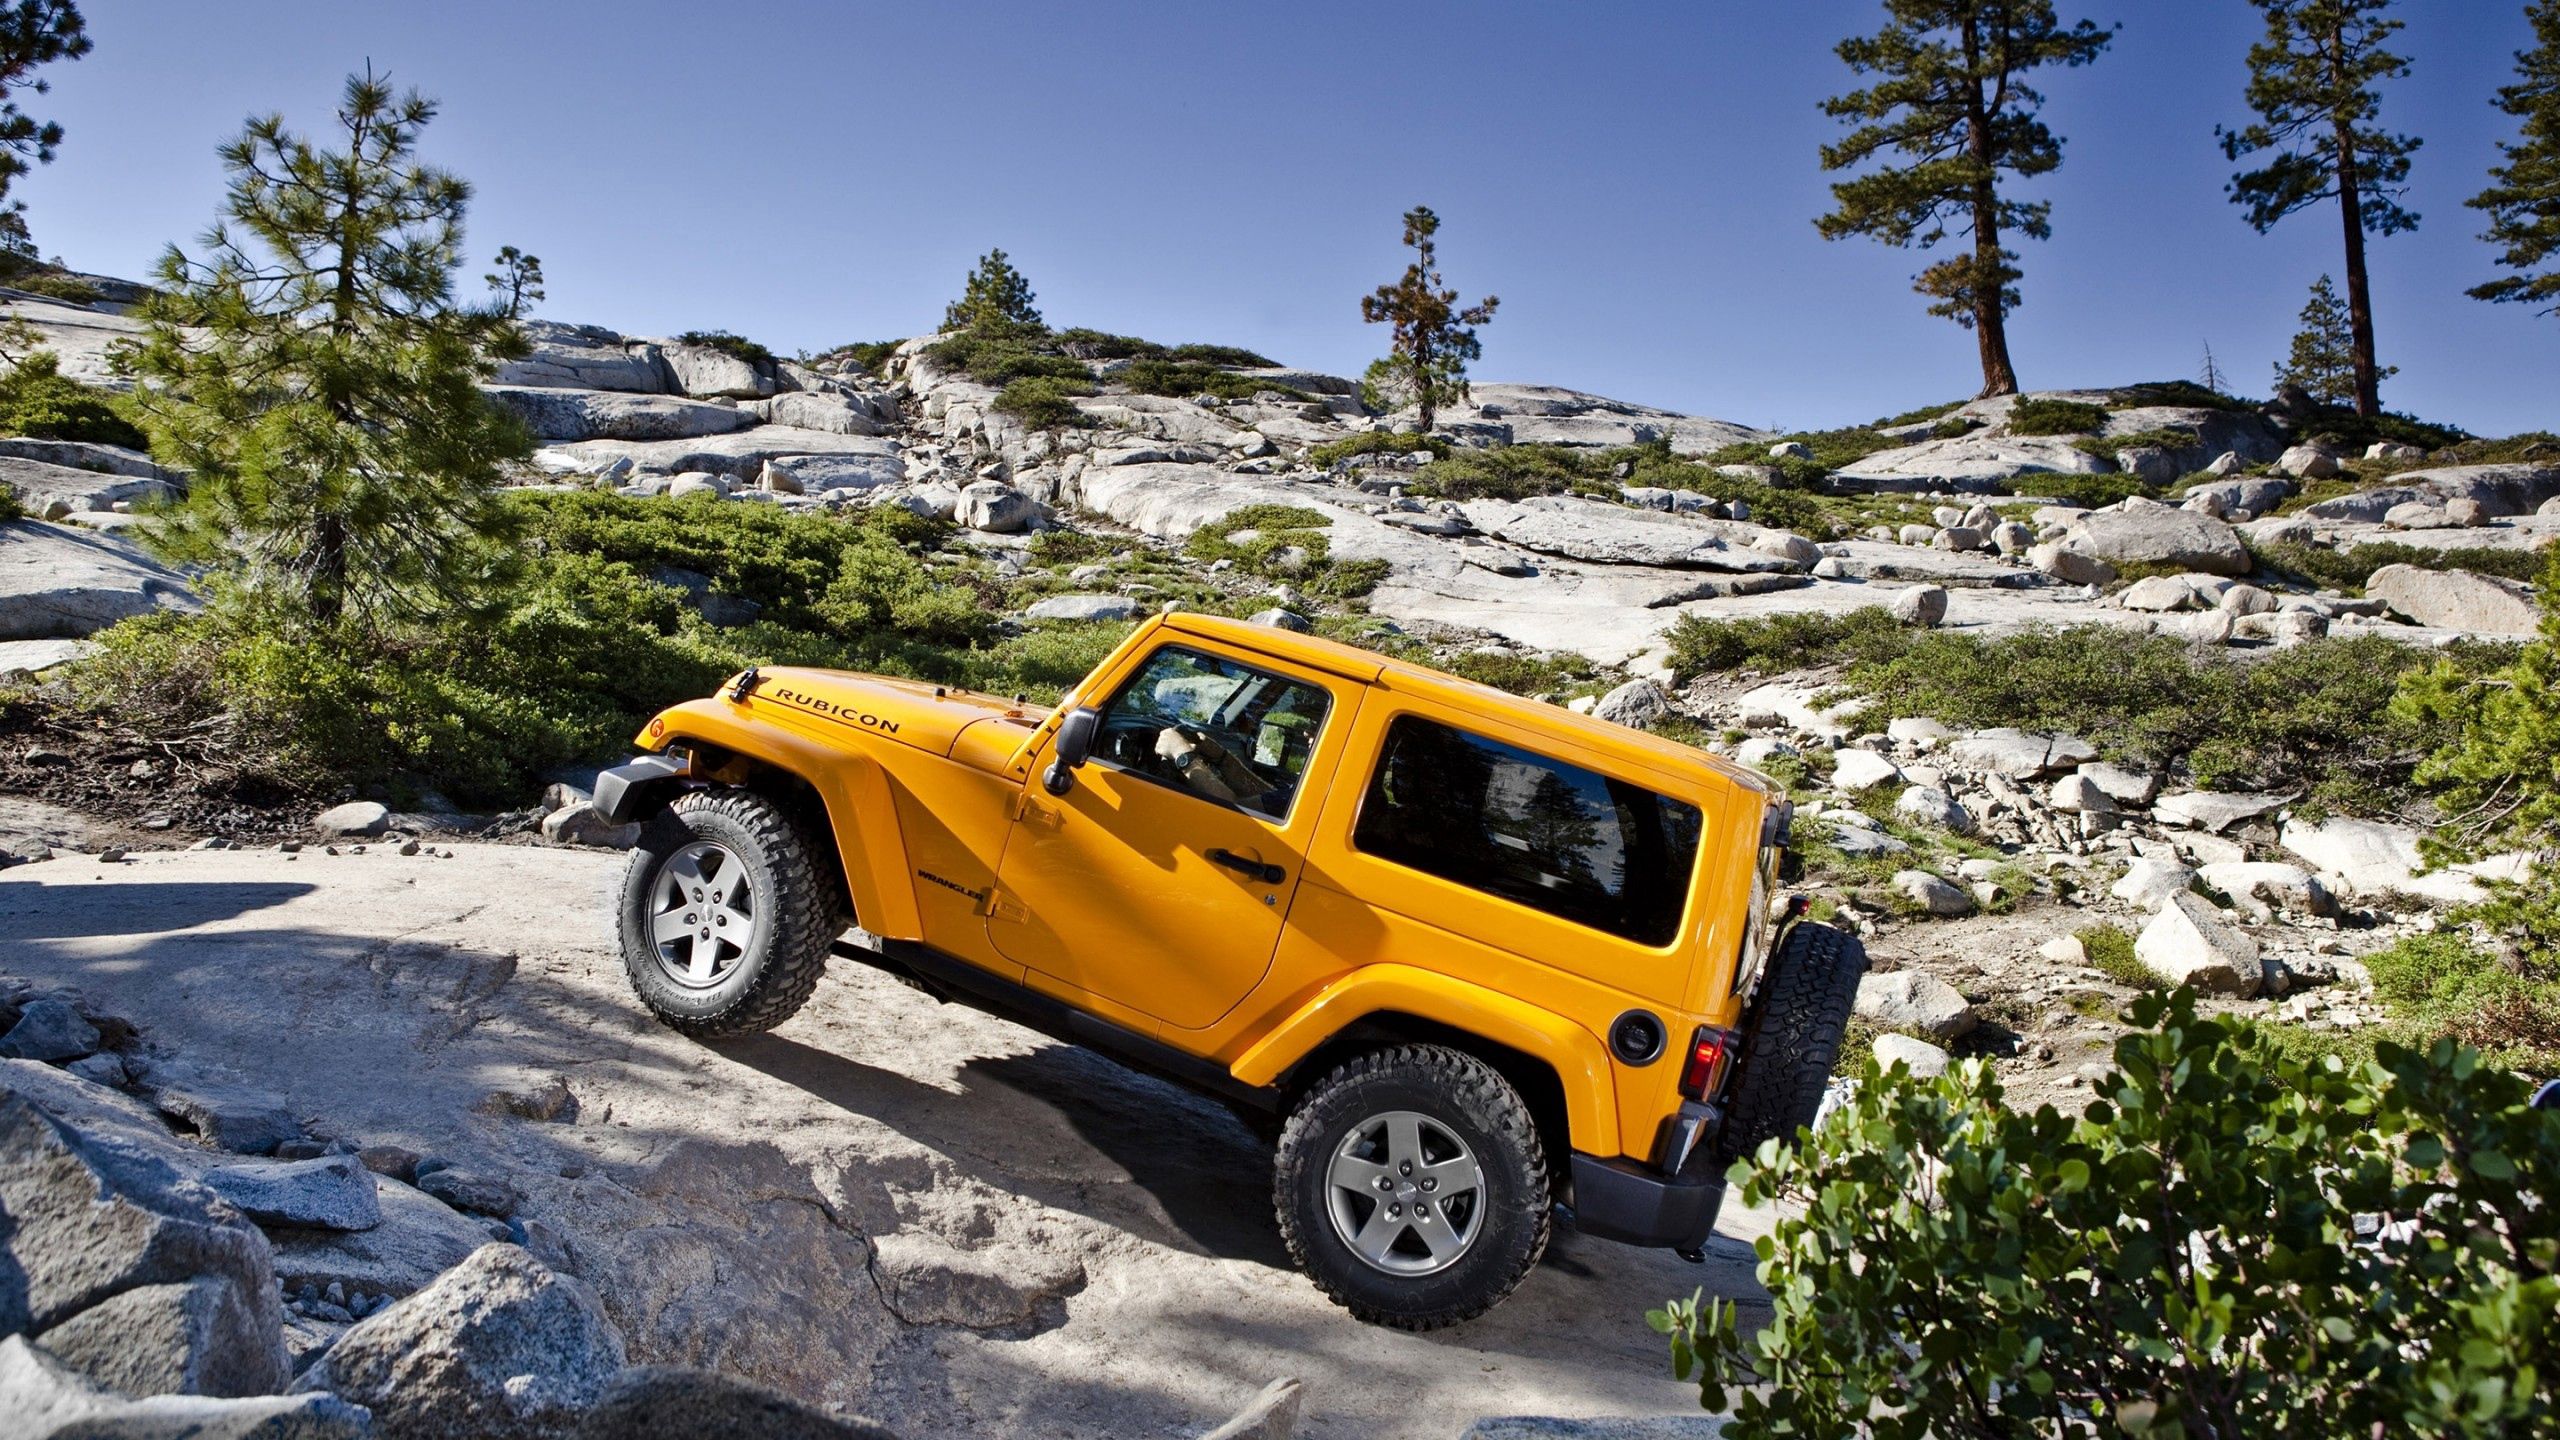 Download Wallpaper 2560x1440 Jeep Wrangler Yellow Mountains Widescreen 16 9 Hd Background